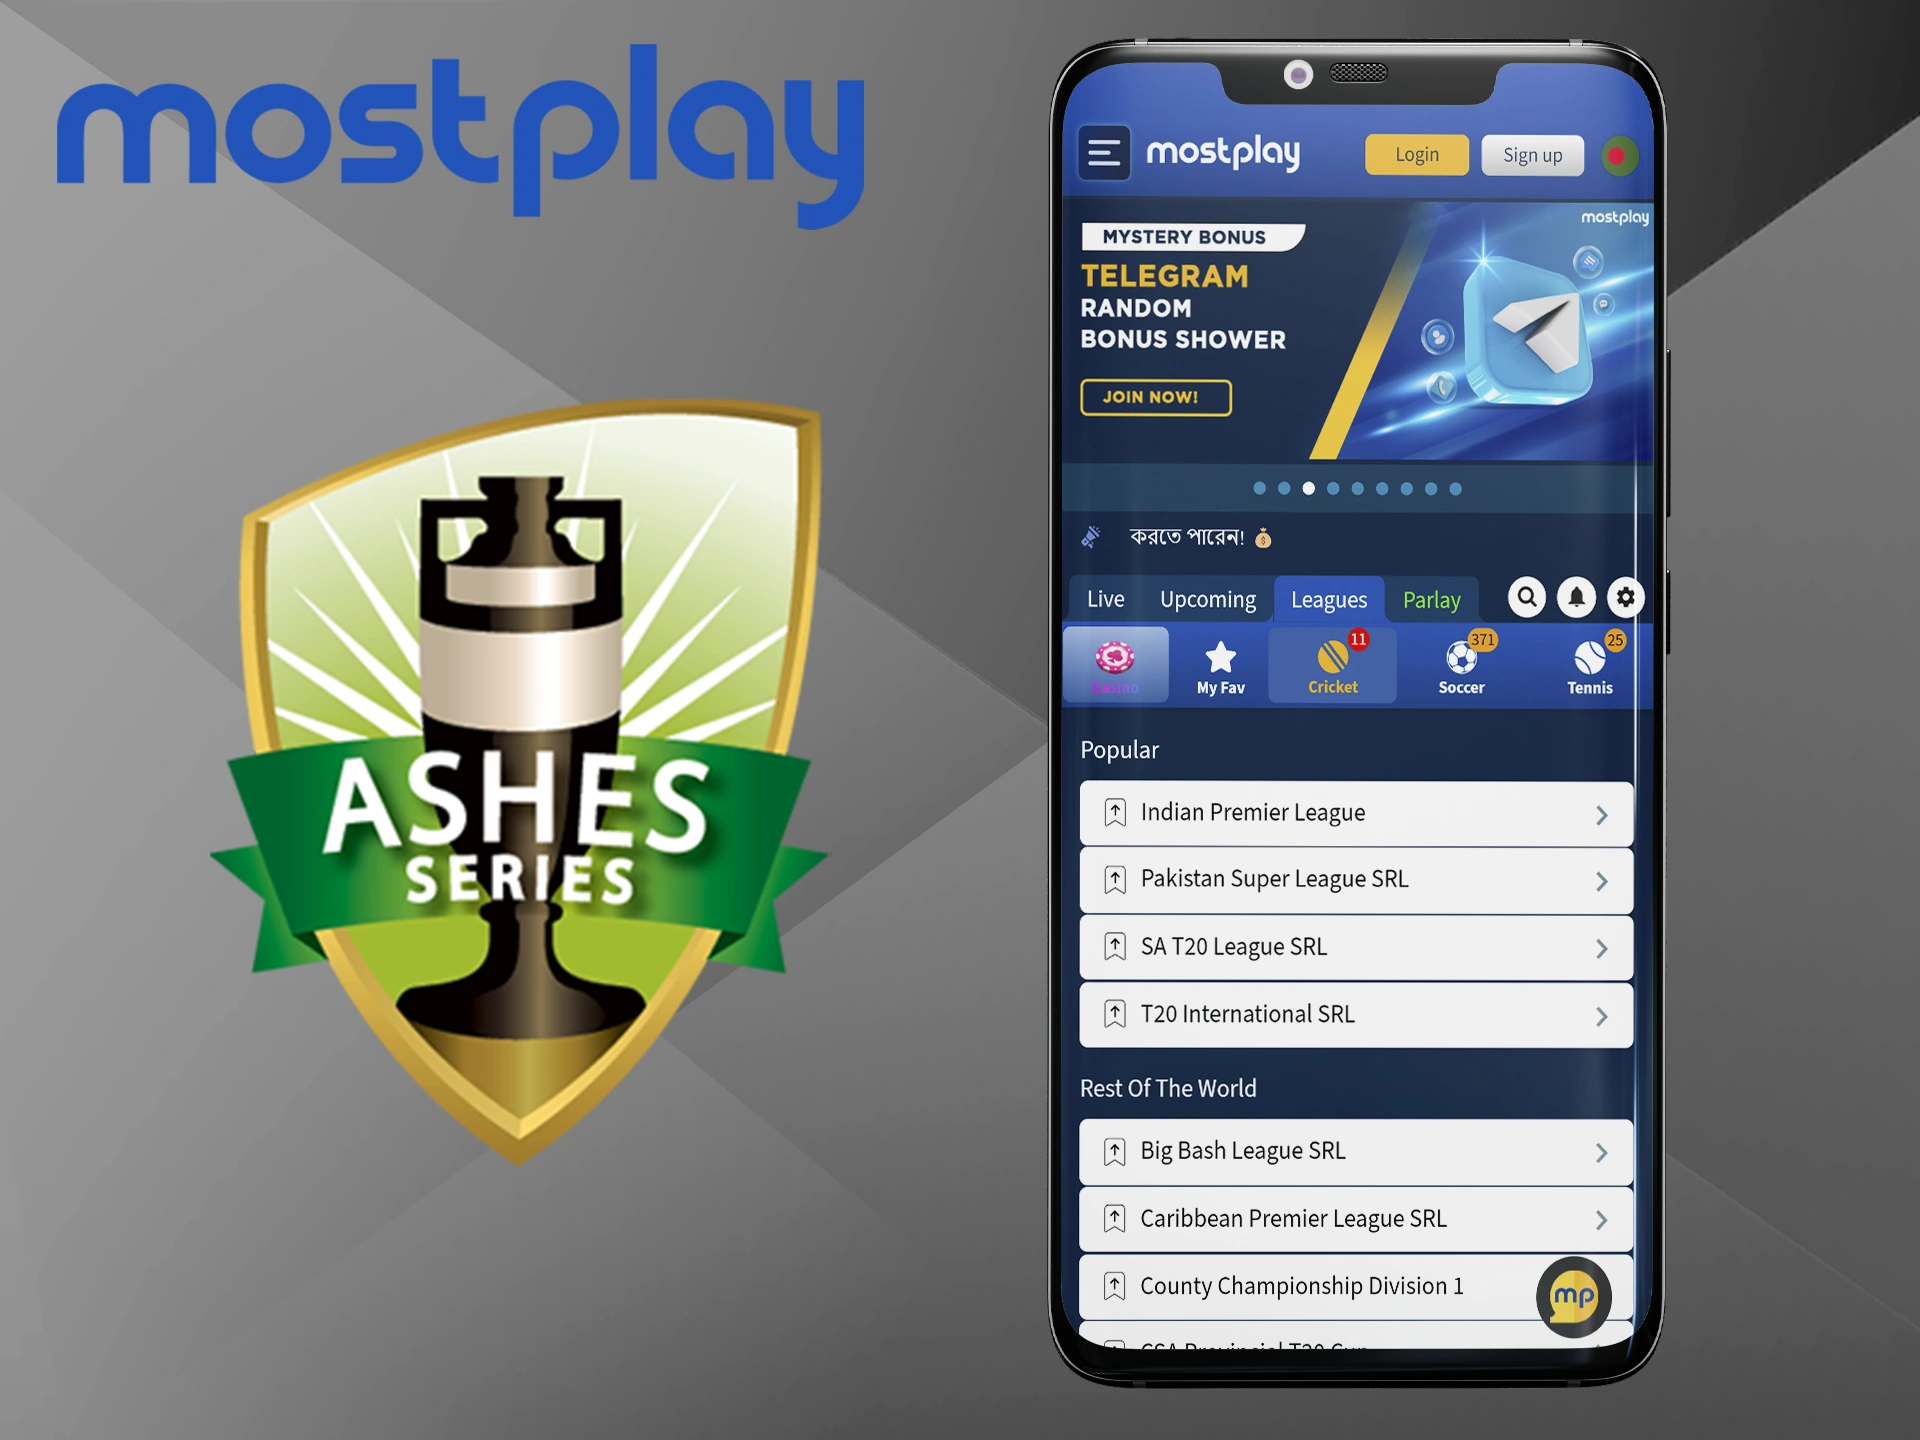 Watch The Ashes live matches and bet on the best teams at Mostplay.